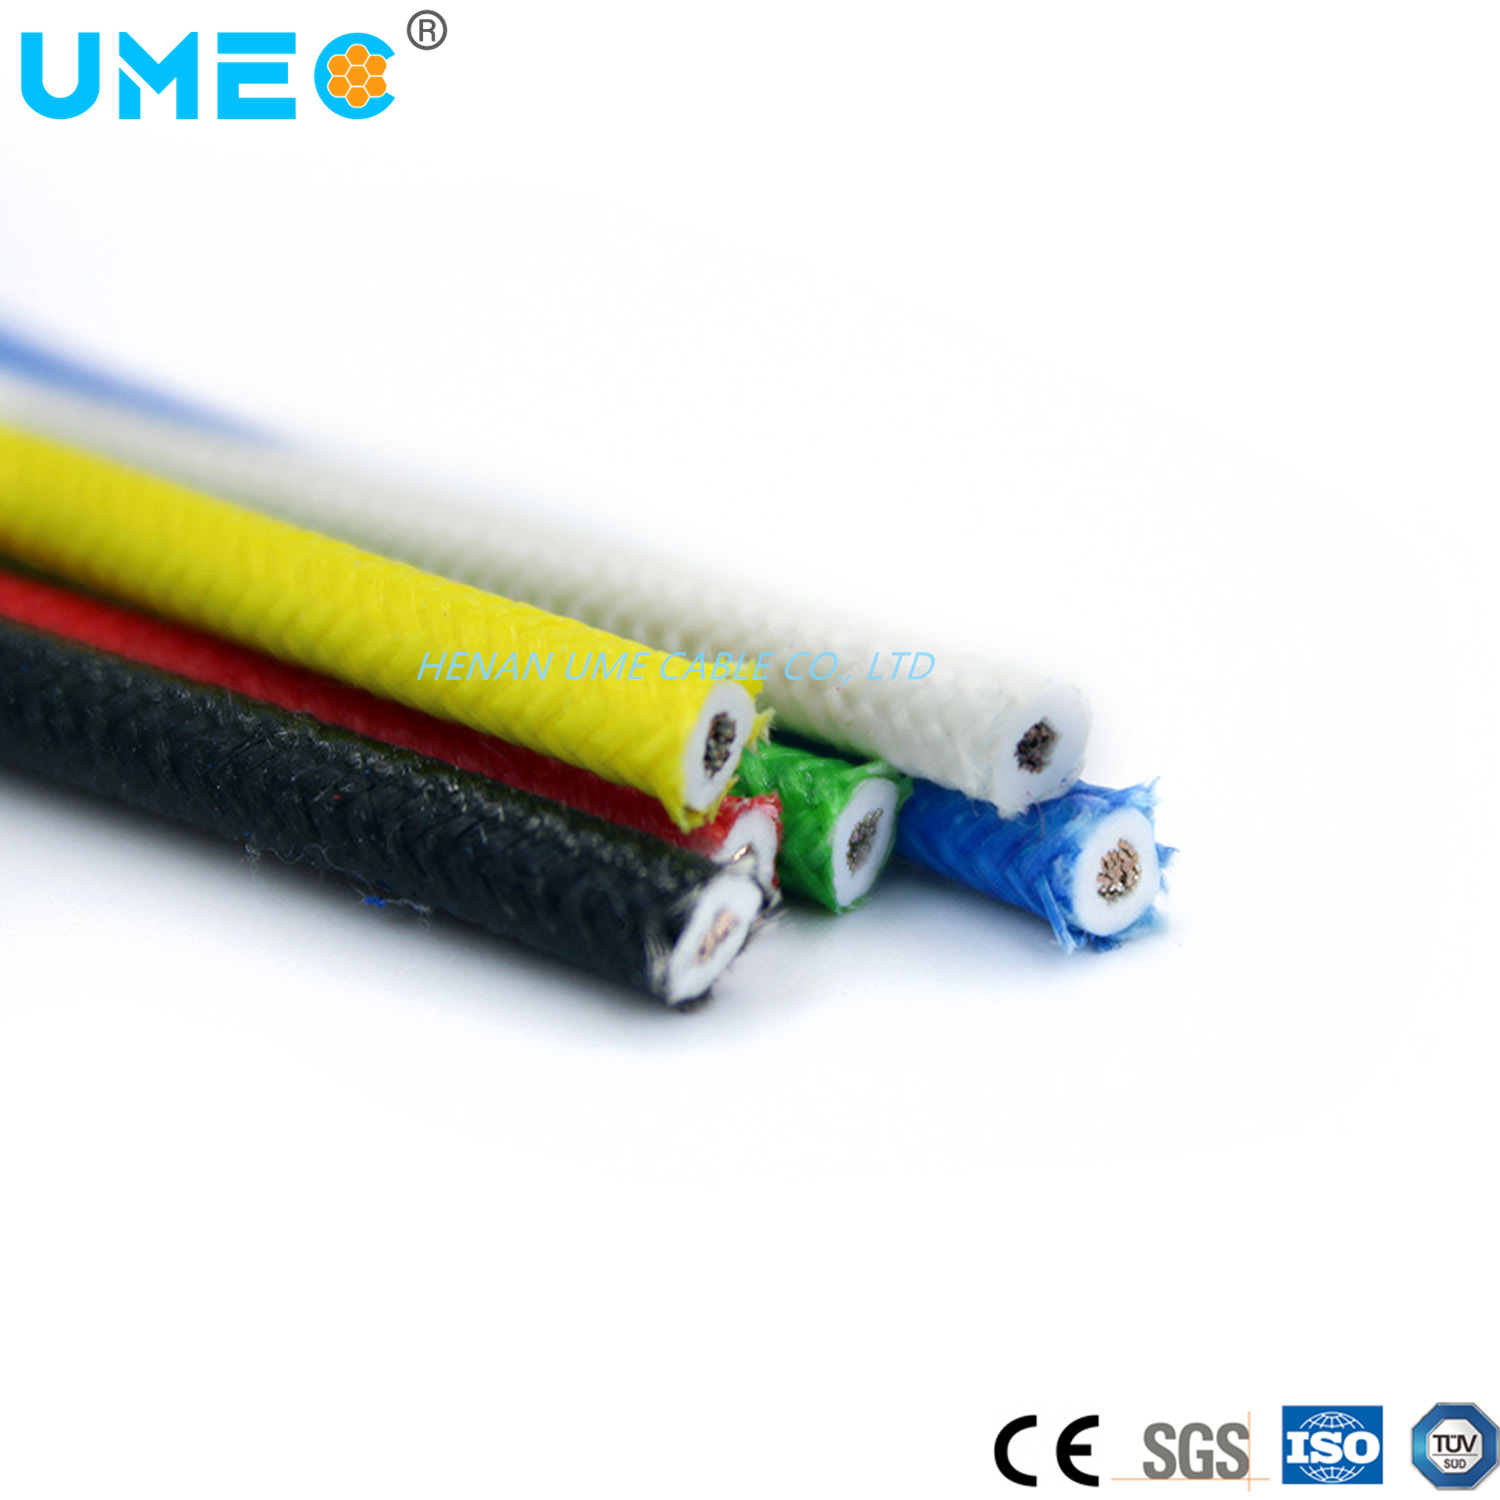 Glass Fiber Braided Fire Resistant Silicone Cable 4 Guage Fiberglass Insulated Heater Wire High Temperature Electric Cable Wire